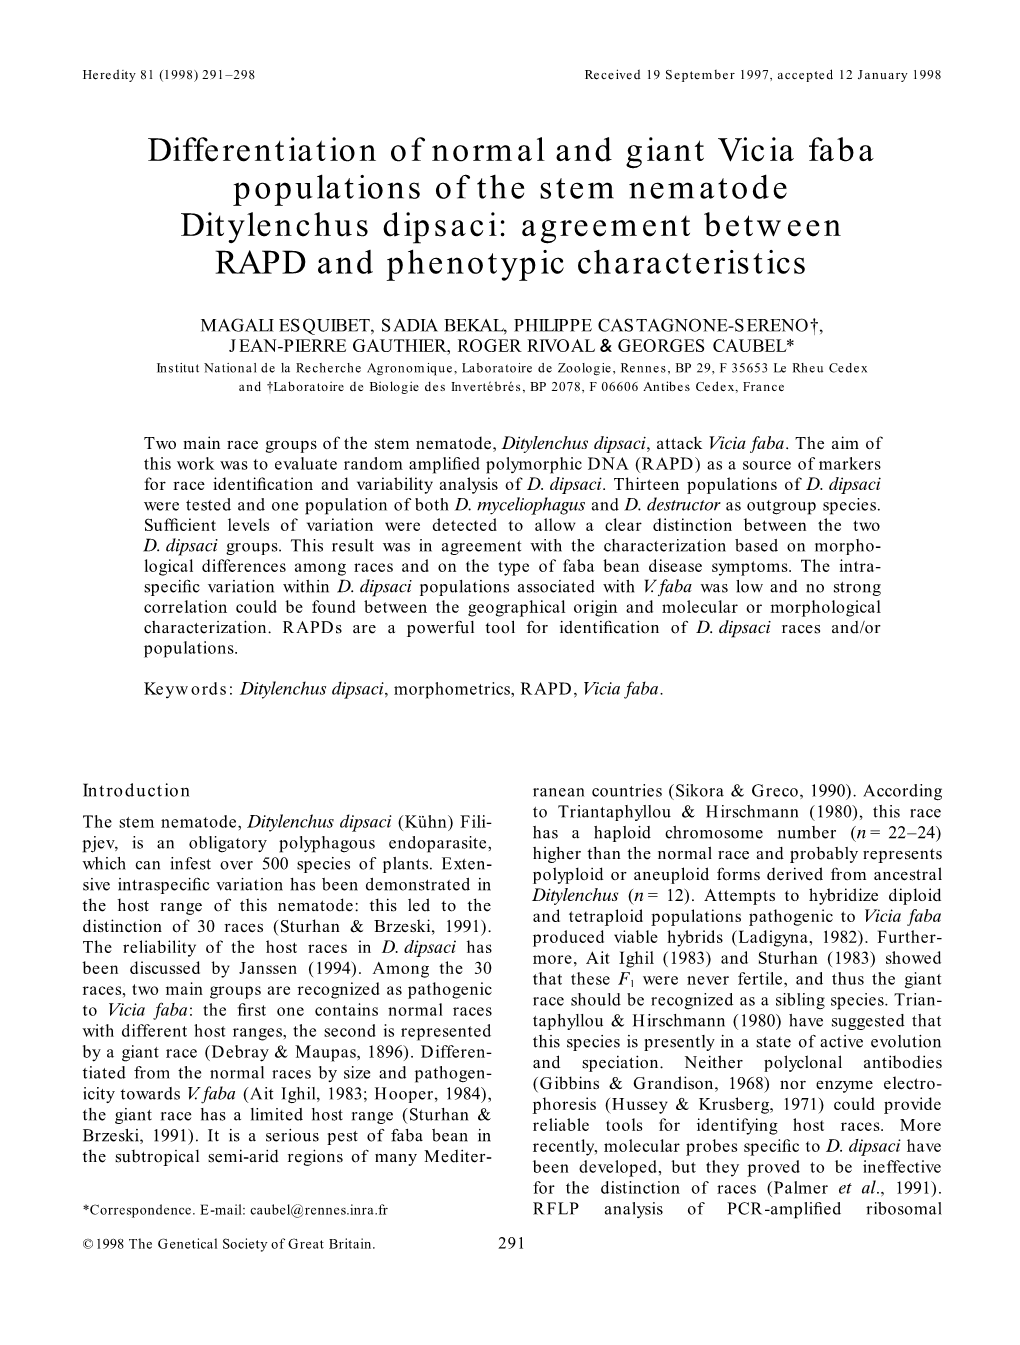 Differentiation of Normal and Giant Vicia Faba Populations of the Stem Nematode Ditylenchus Dipsaci: Agreement Between RAPD and Phenotypic Characteristics